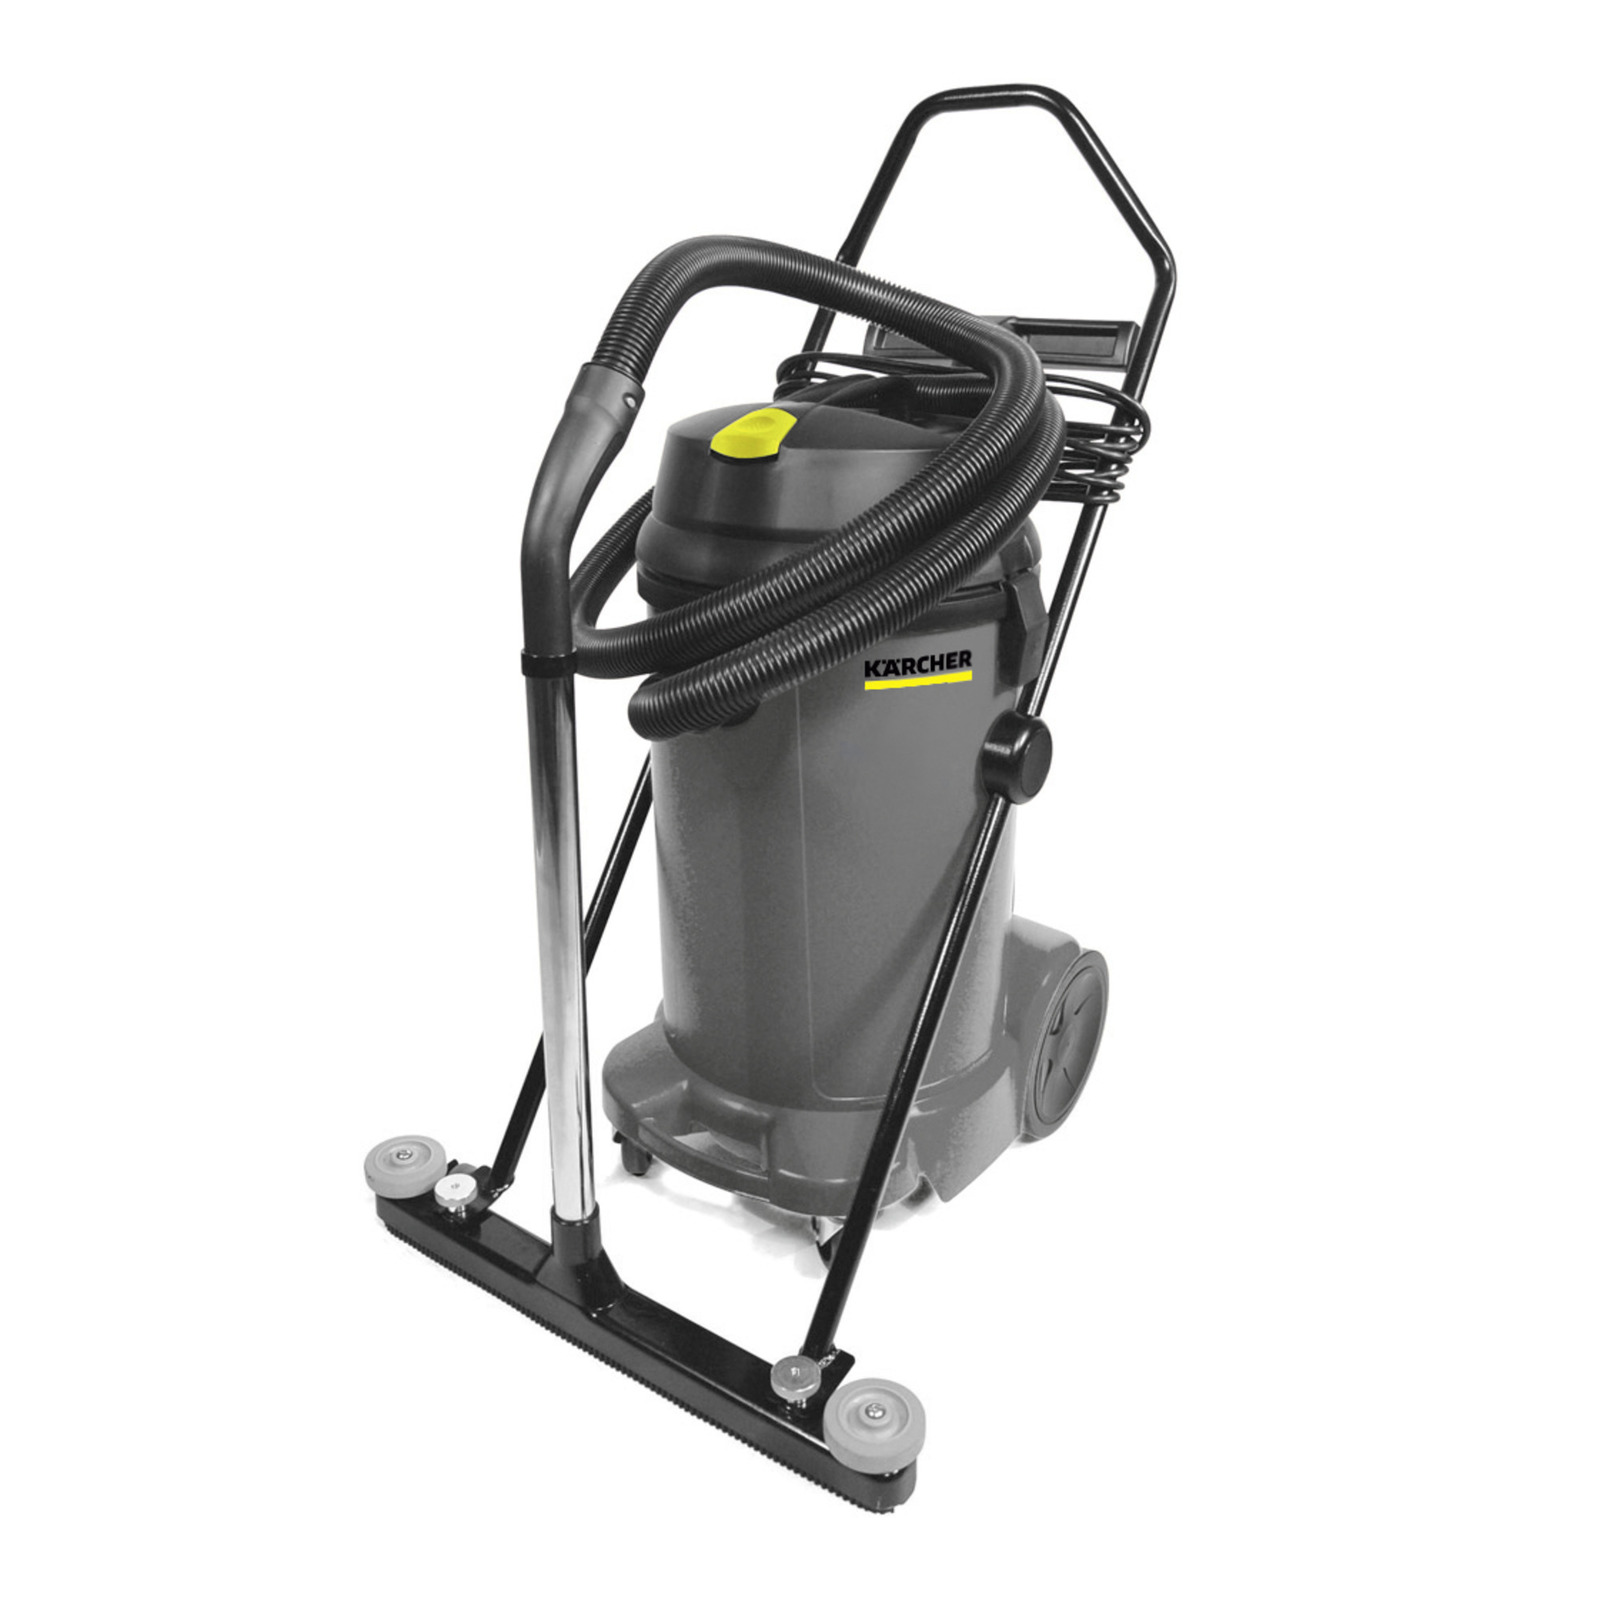 Wet, Dry, and Wet/Dry Vacuums: Which One Is Best?